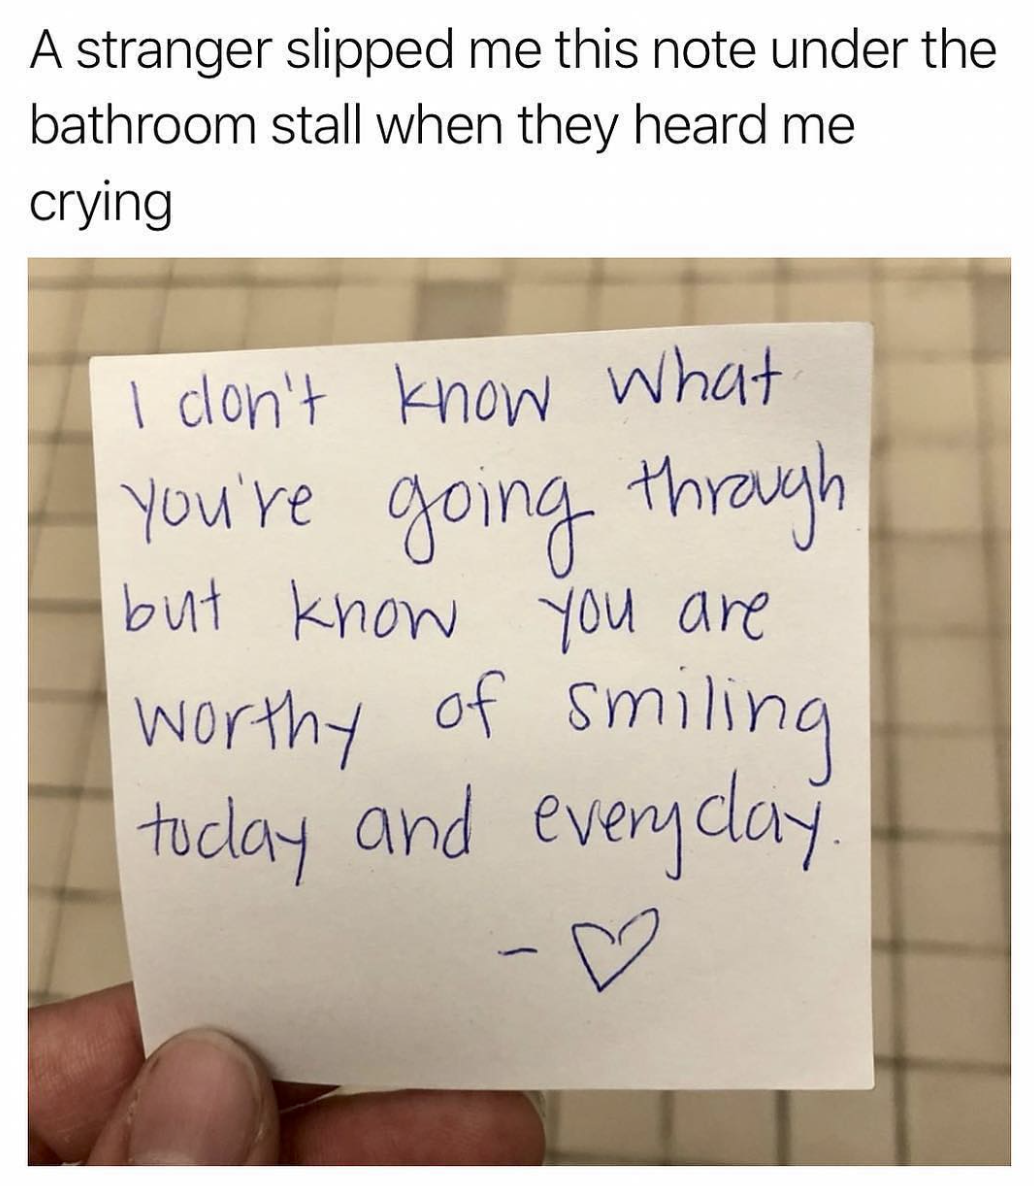 wholesome memes and pics - handwriting - A stranger slipped me this note under the bathroom stall when they heard me crying I don't know what You're going through but know you are worthy of smiling today and everyday. 1